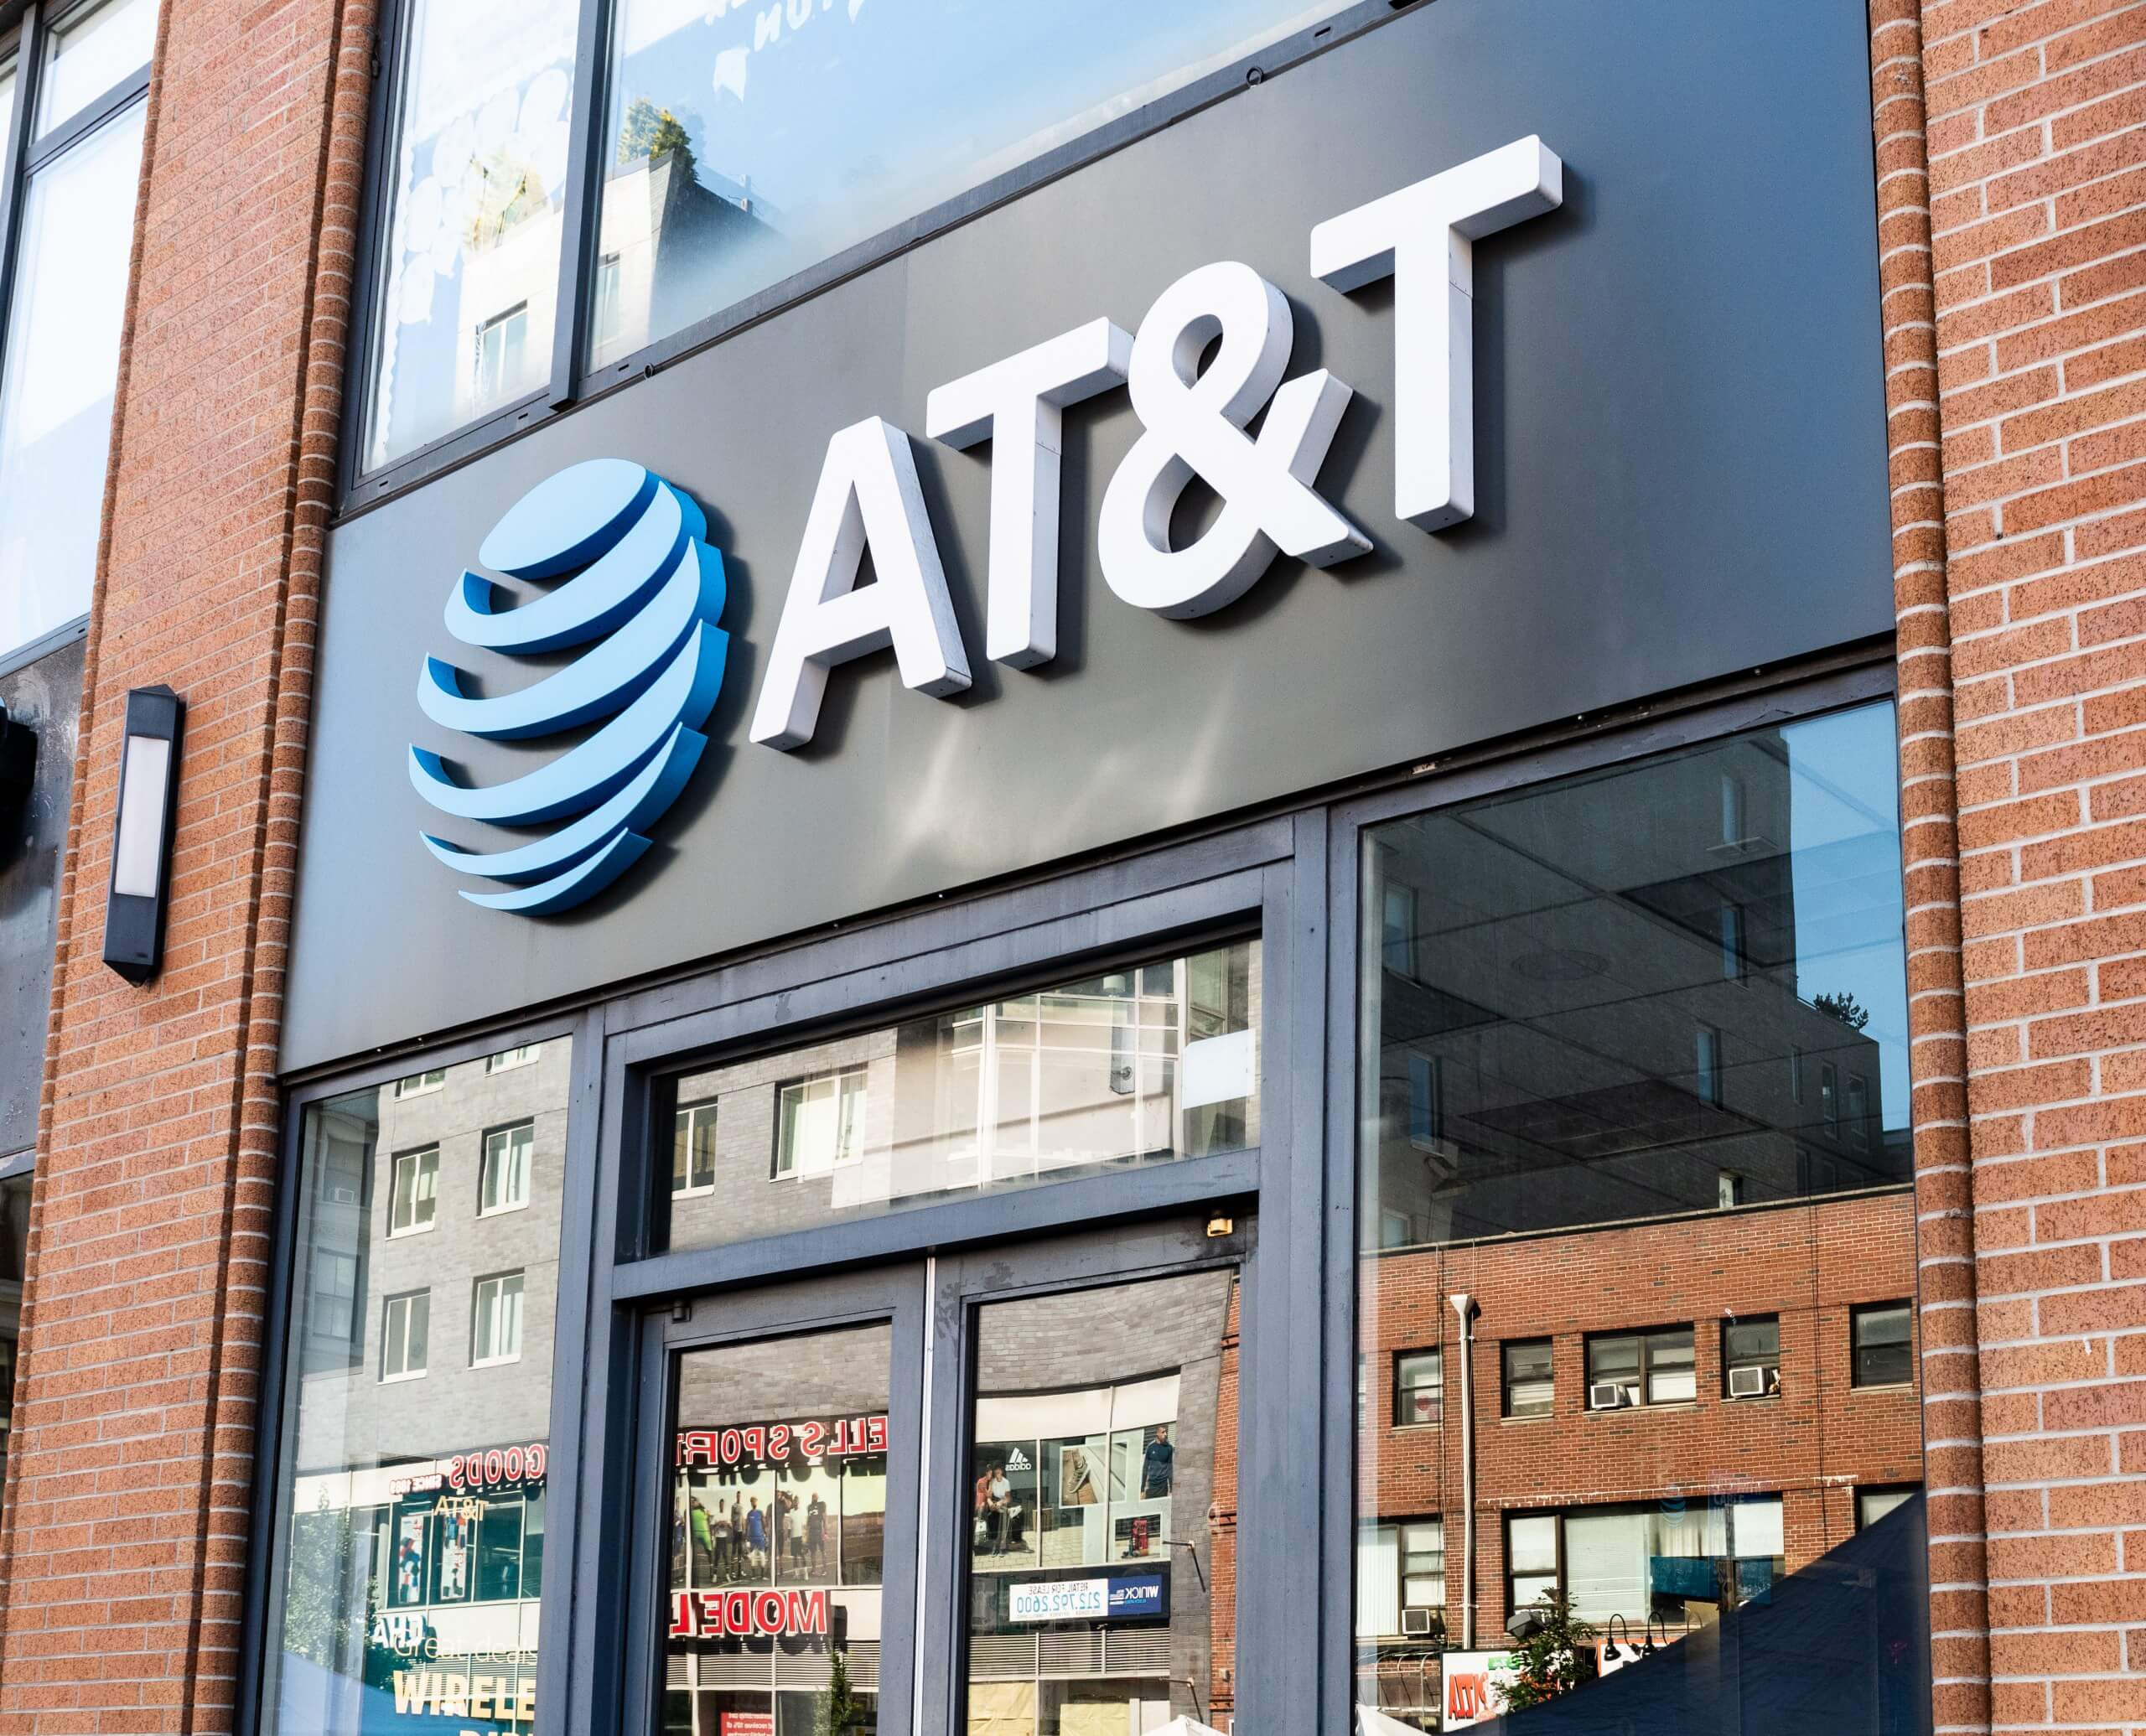 5G wireless pricing could be tiered like fixed line says AT&T CEO